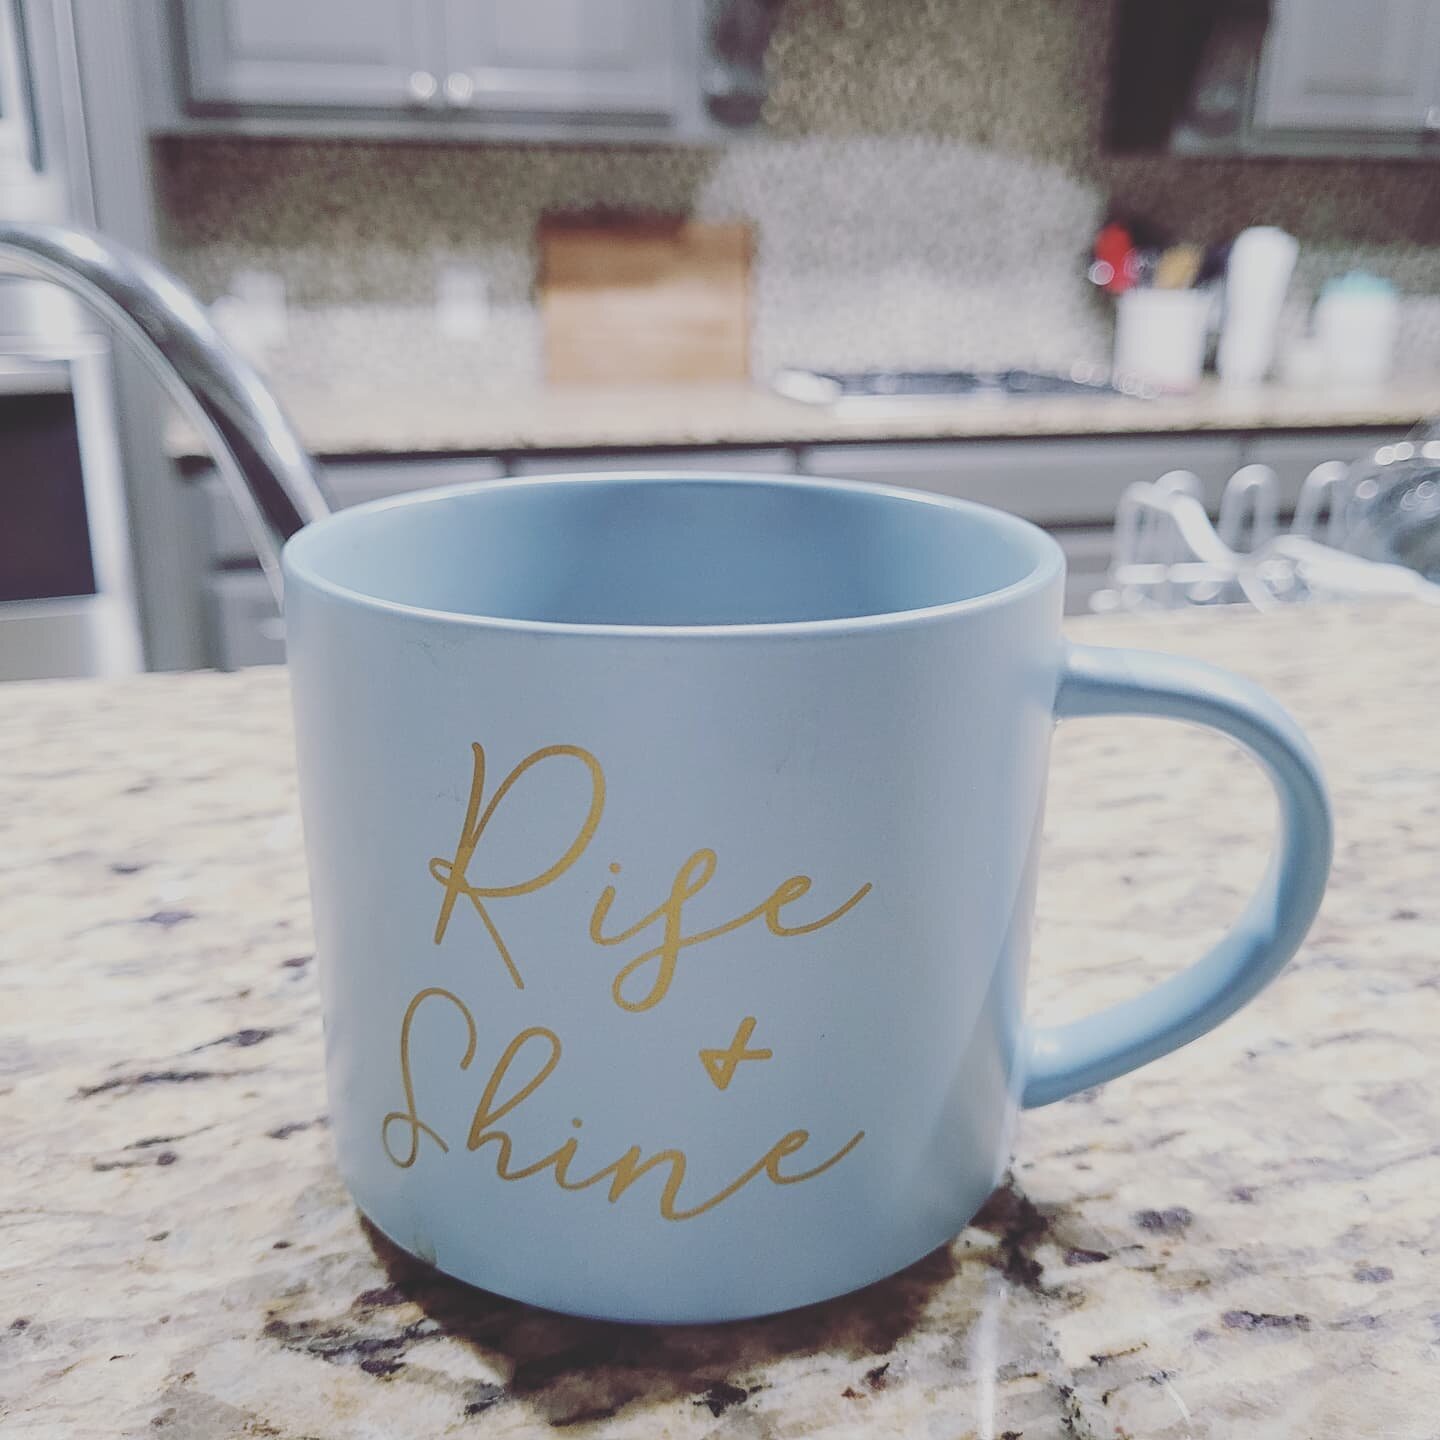 I love coffee and I really needed it this morning! I bought this mug at Target the day after we moved into our new house before the moving truck arrived...because I needed a mug. Positive affirmations with caffeine, never a bad combo! Coffee doesn't 